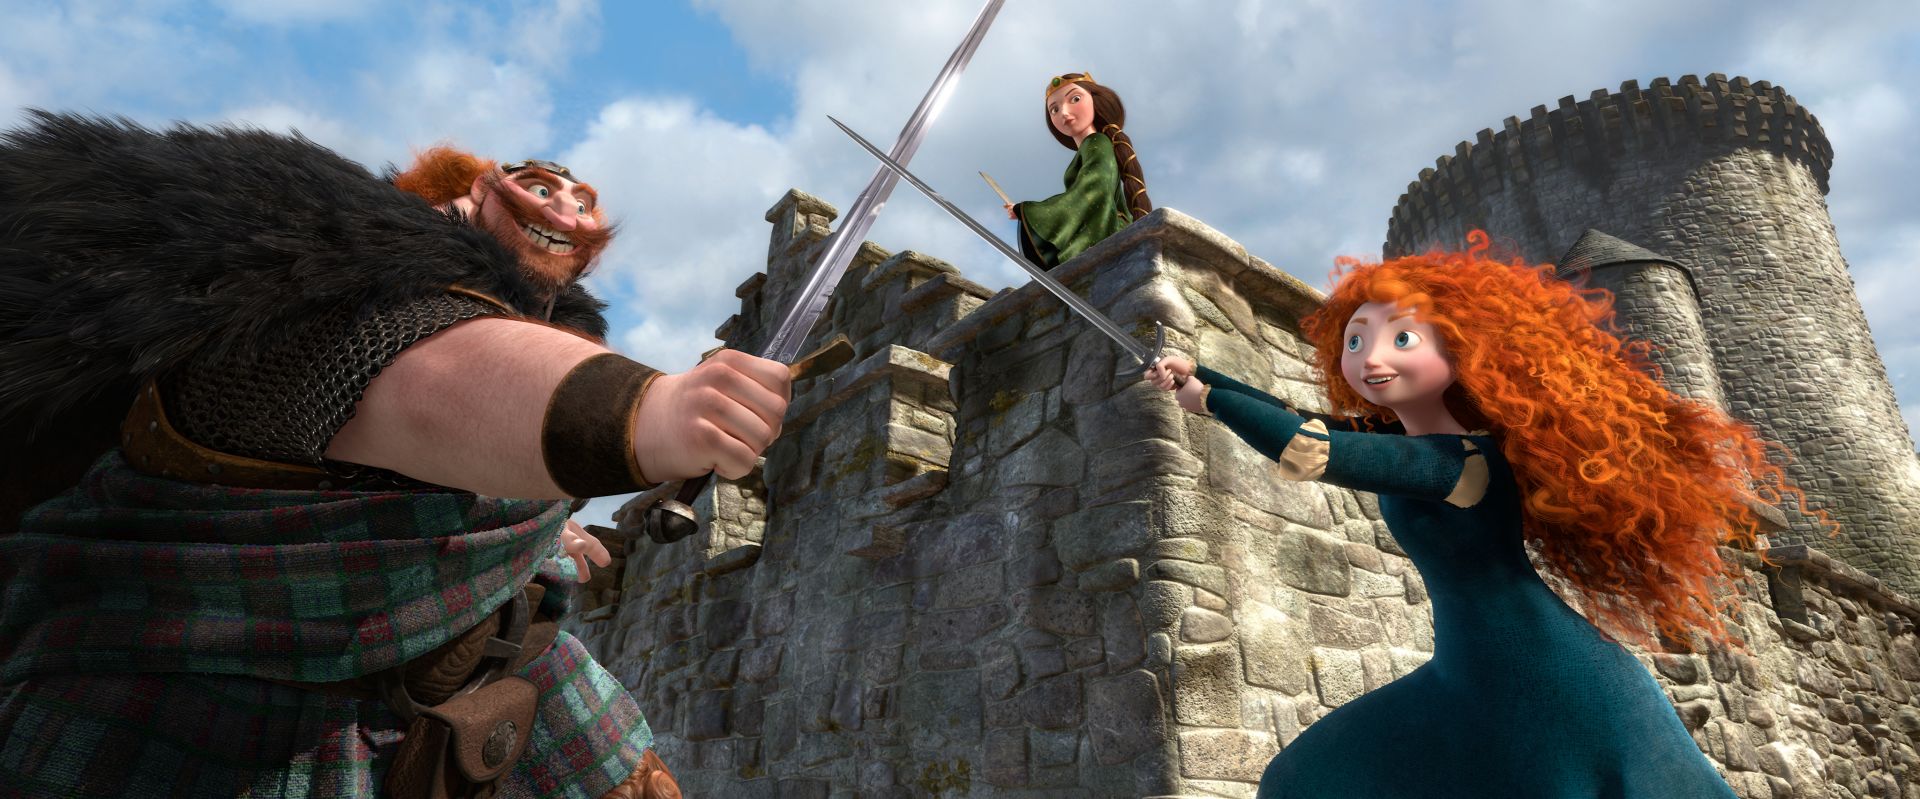 Review: Pixar's 'Brave' Is A Powerful But Wobbly Feminist Fairy Tale